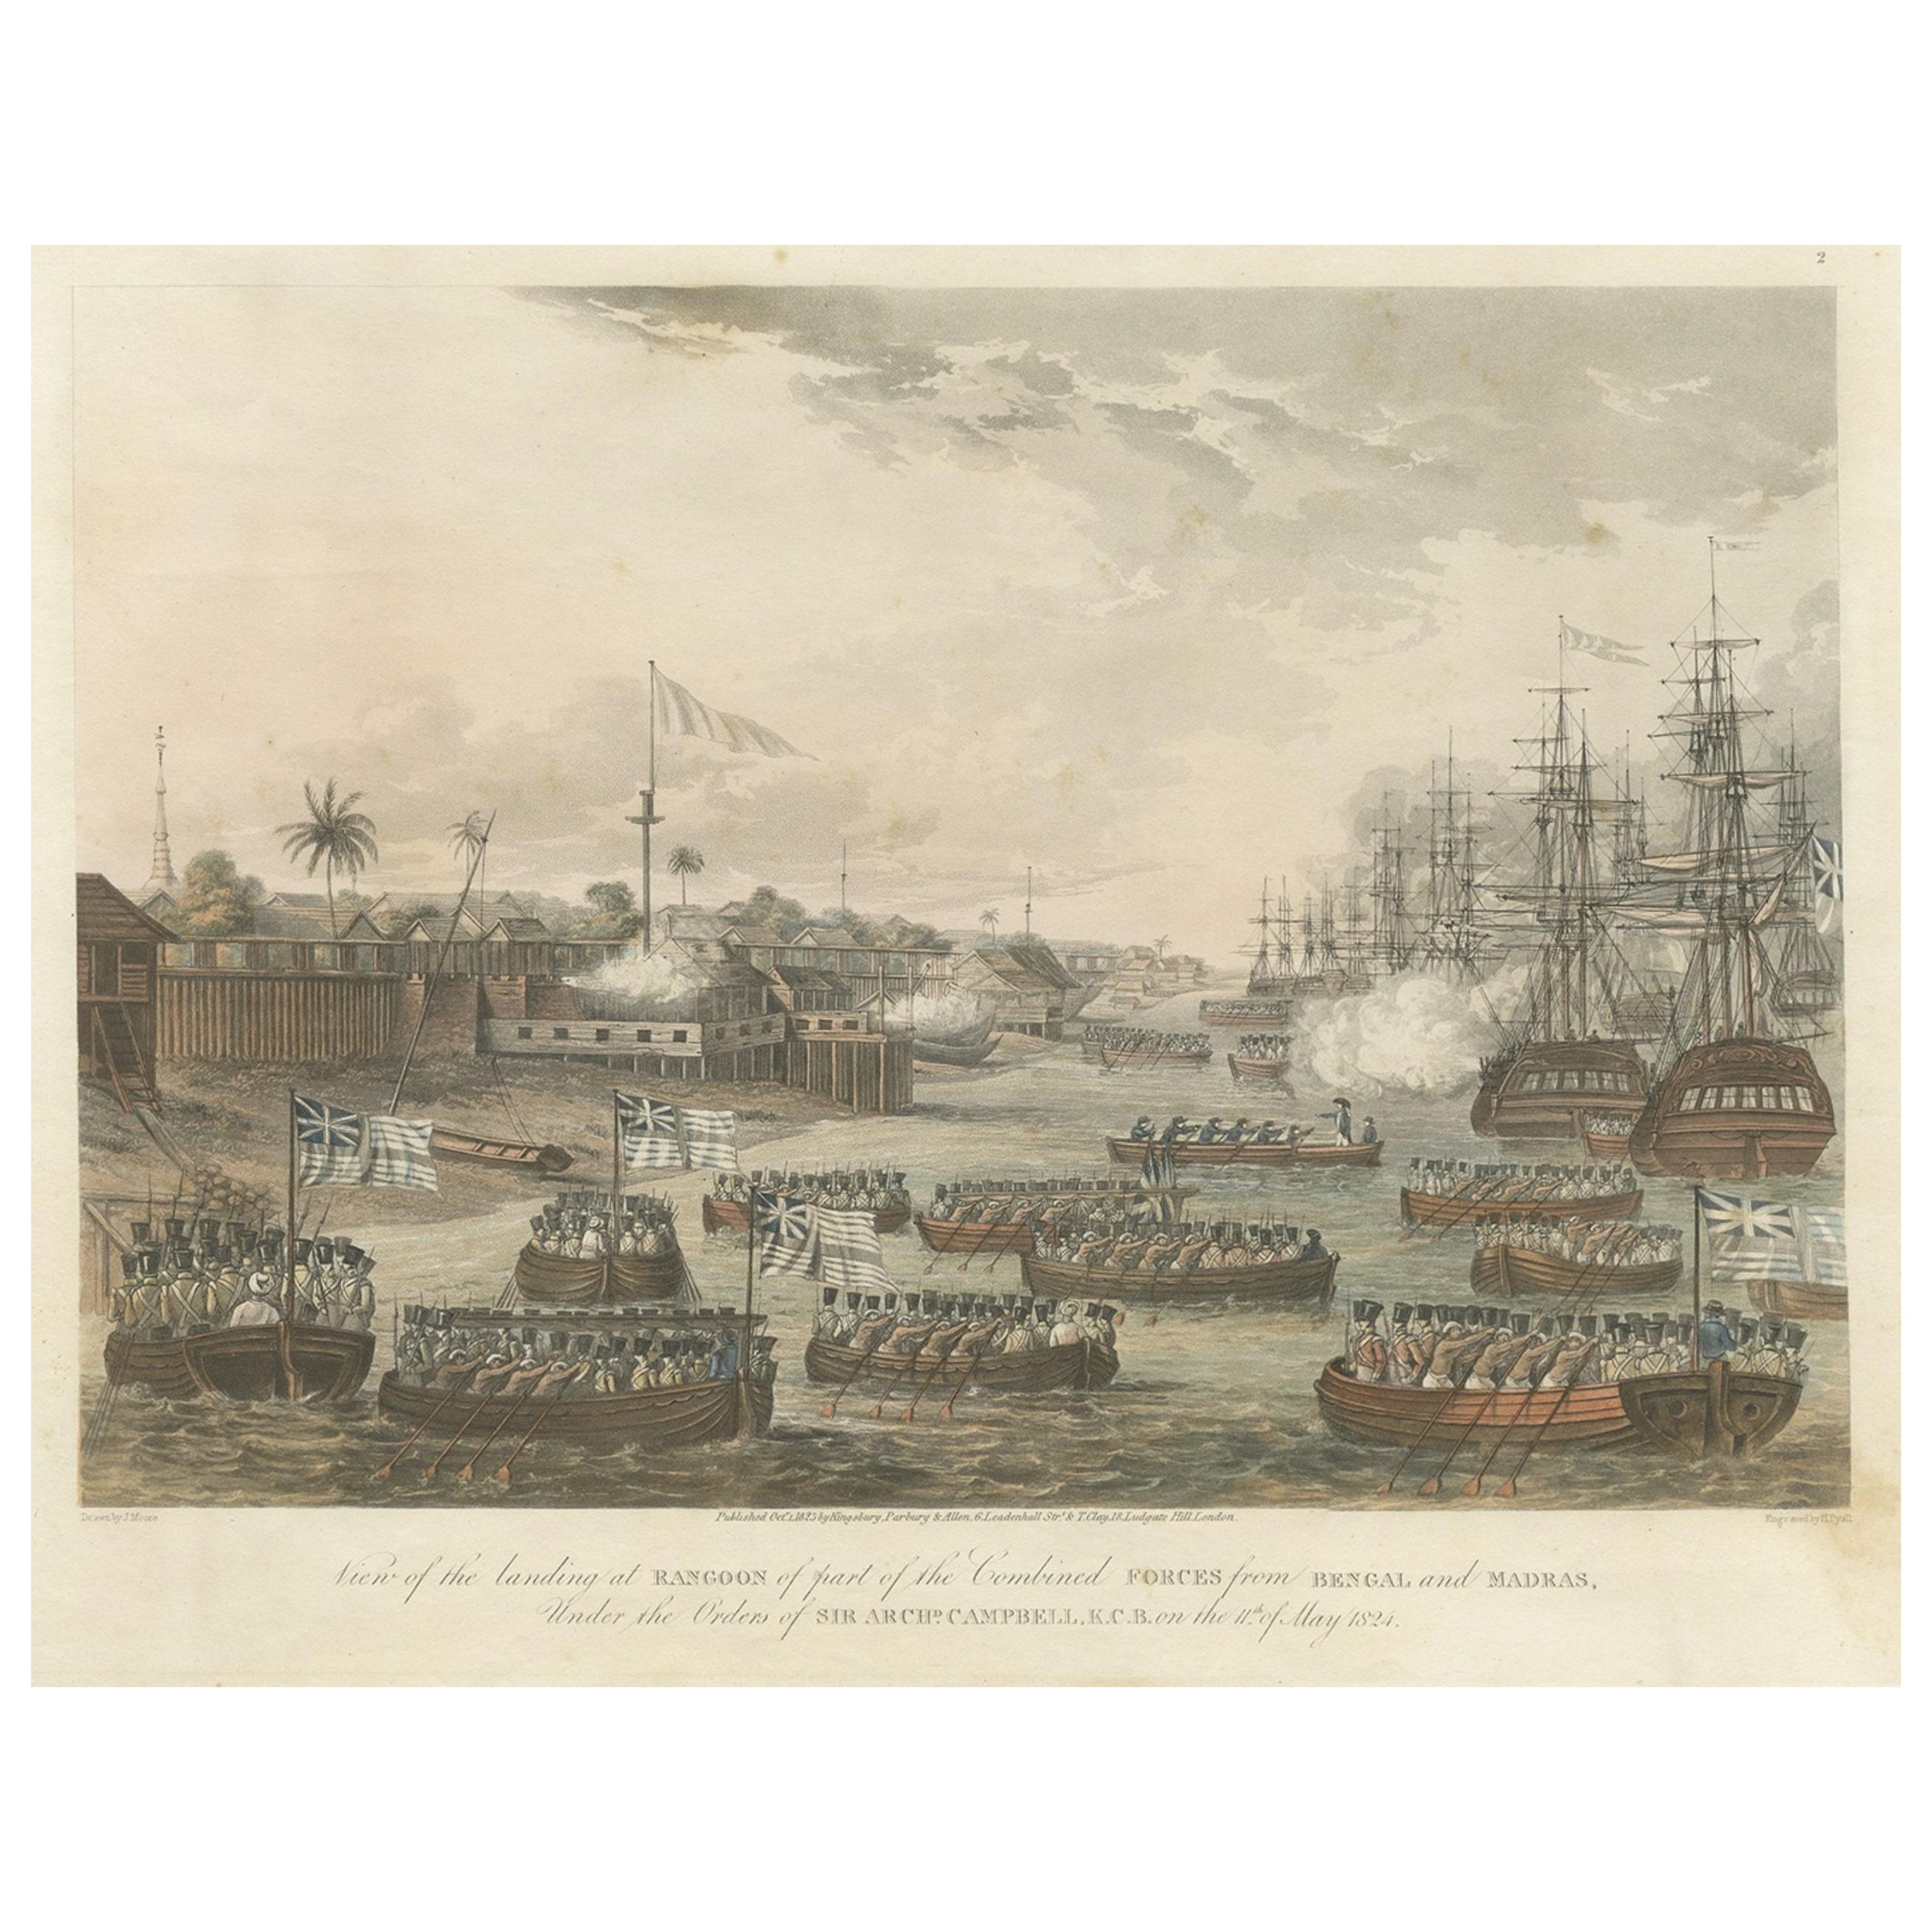 Antique Print of the Landing at Rangoon of Forces from Bengal and Madras, 1825